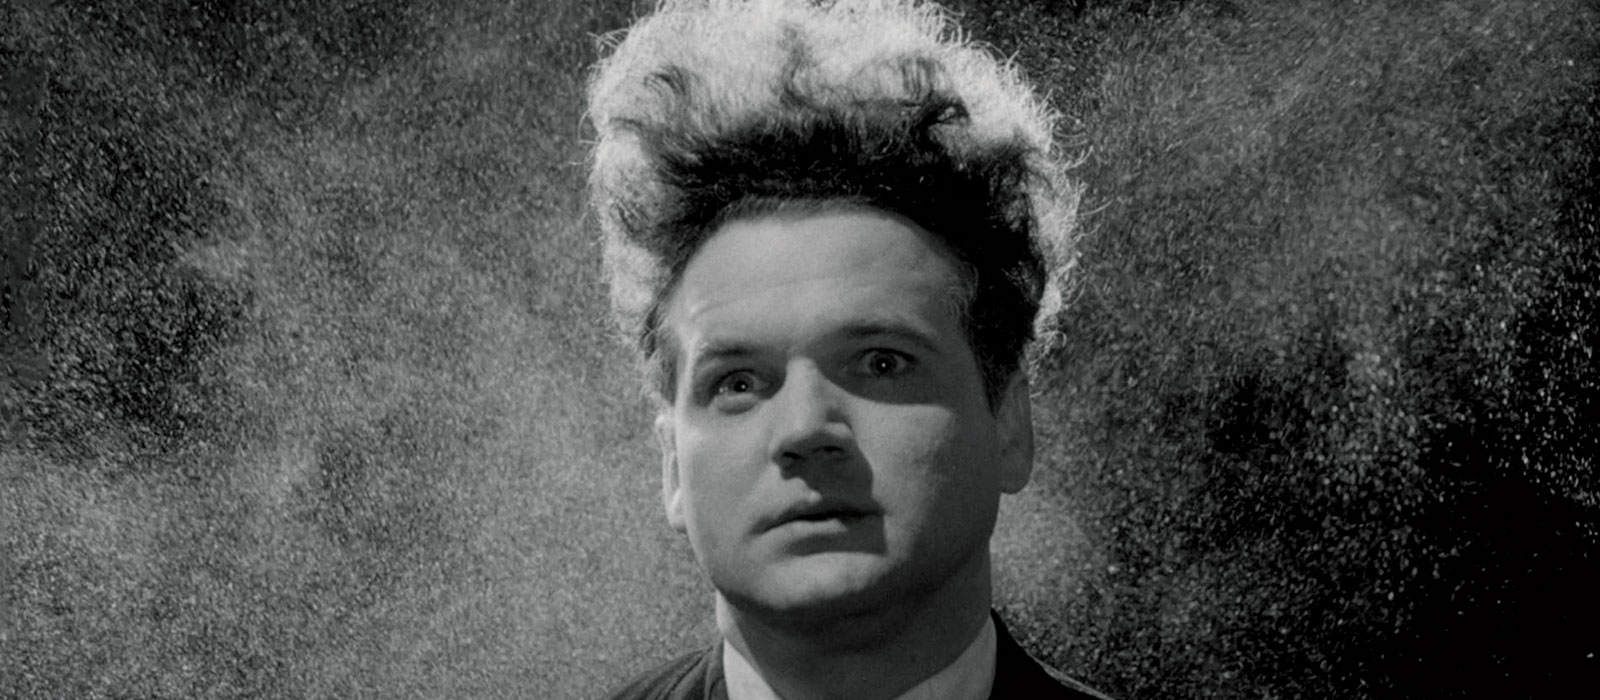 HQ Eraserhead Wallpapers | File 212.22Kb